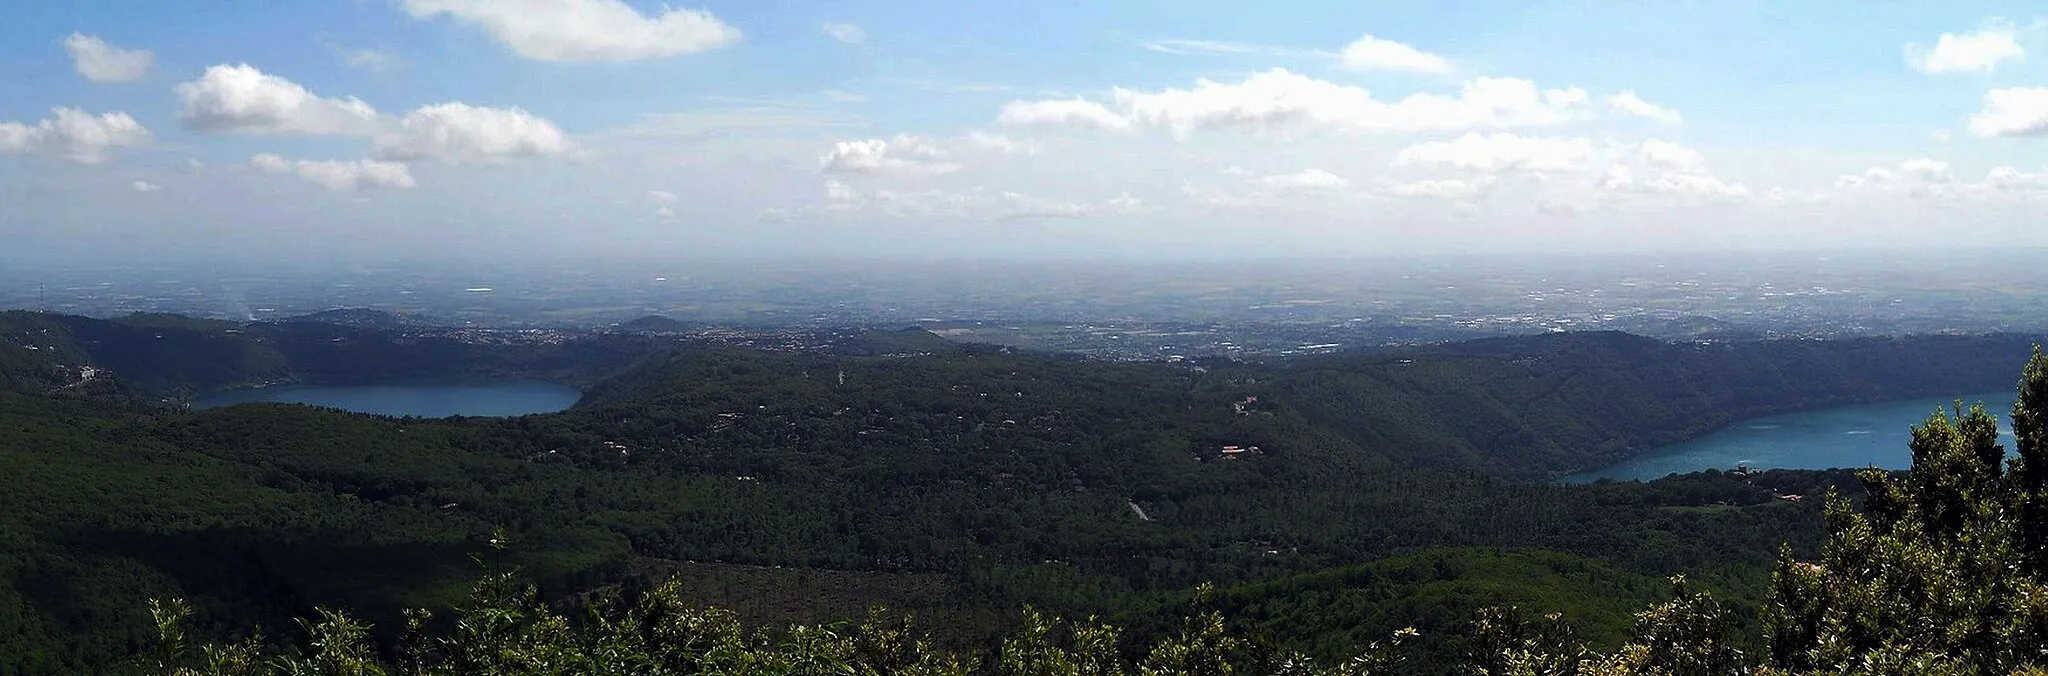 Photo showing: The Alban hills - view from Monte Cavo - Rocca di Papa (Rm)